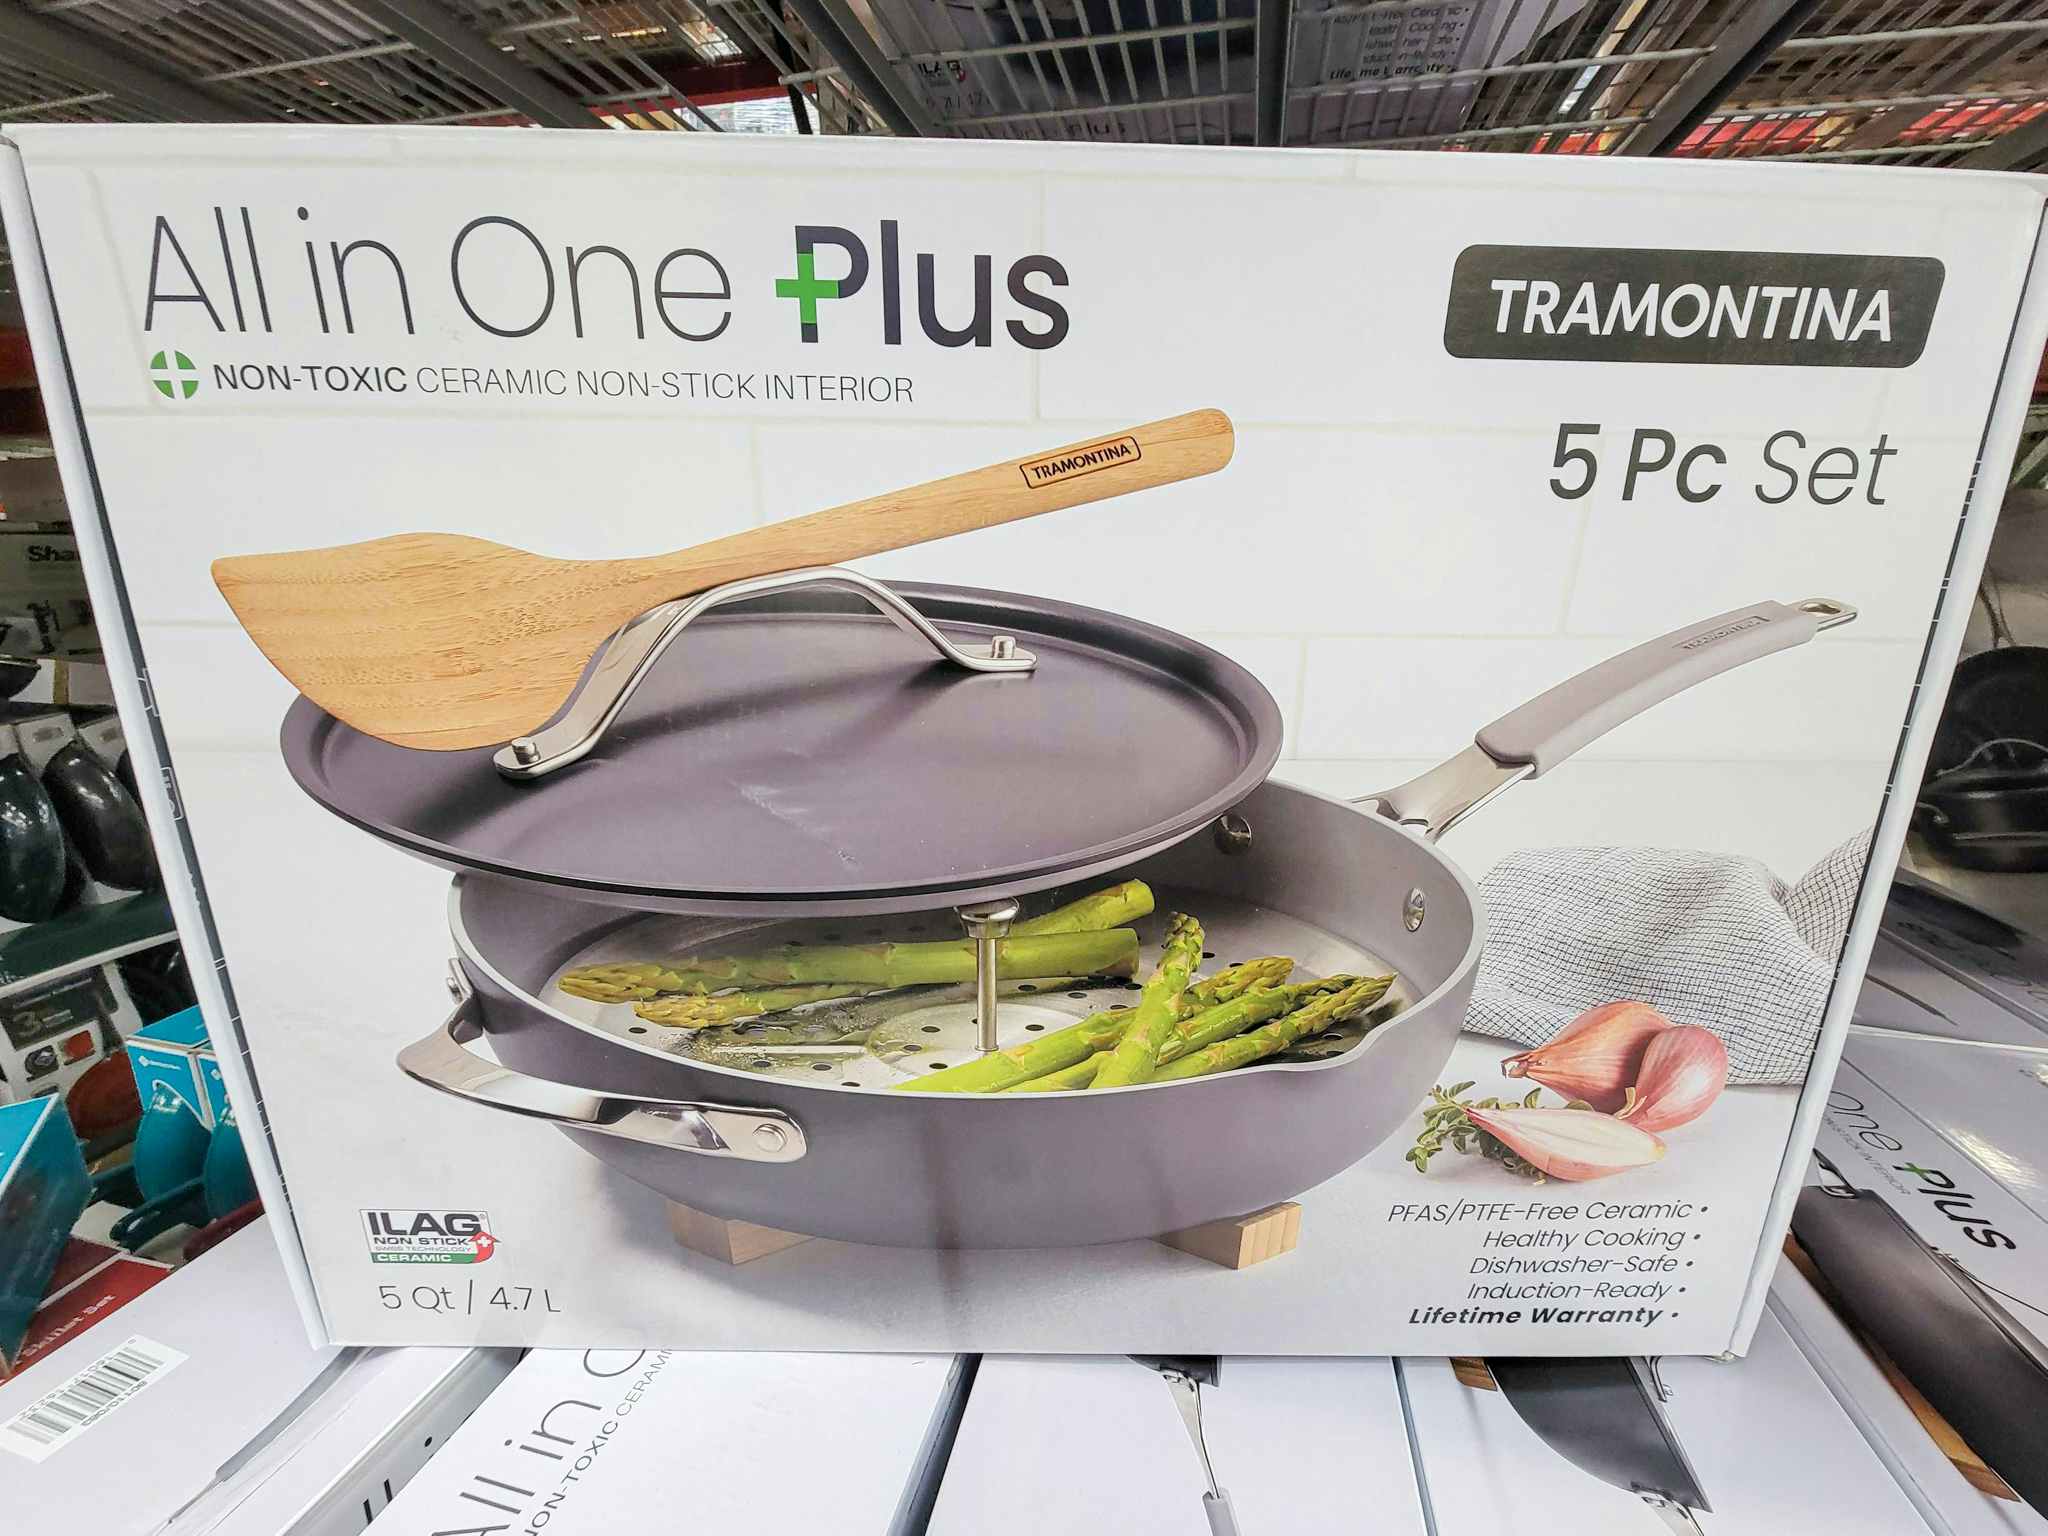 a 5 quart tramontina all in one pan